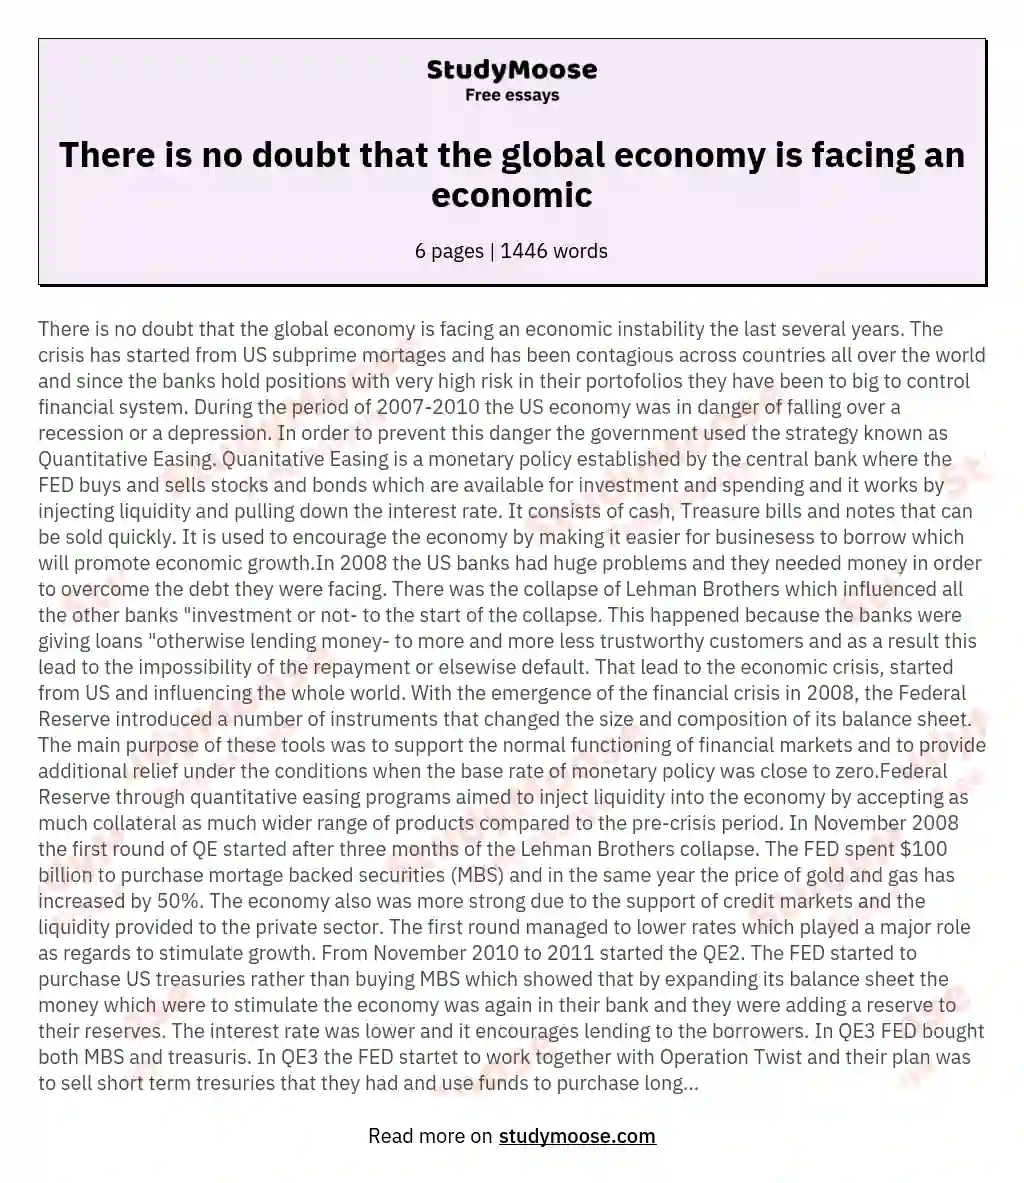 There is no doubt that the global economy is facing an economic essay